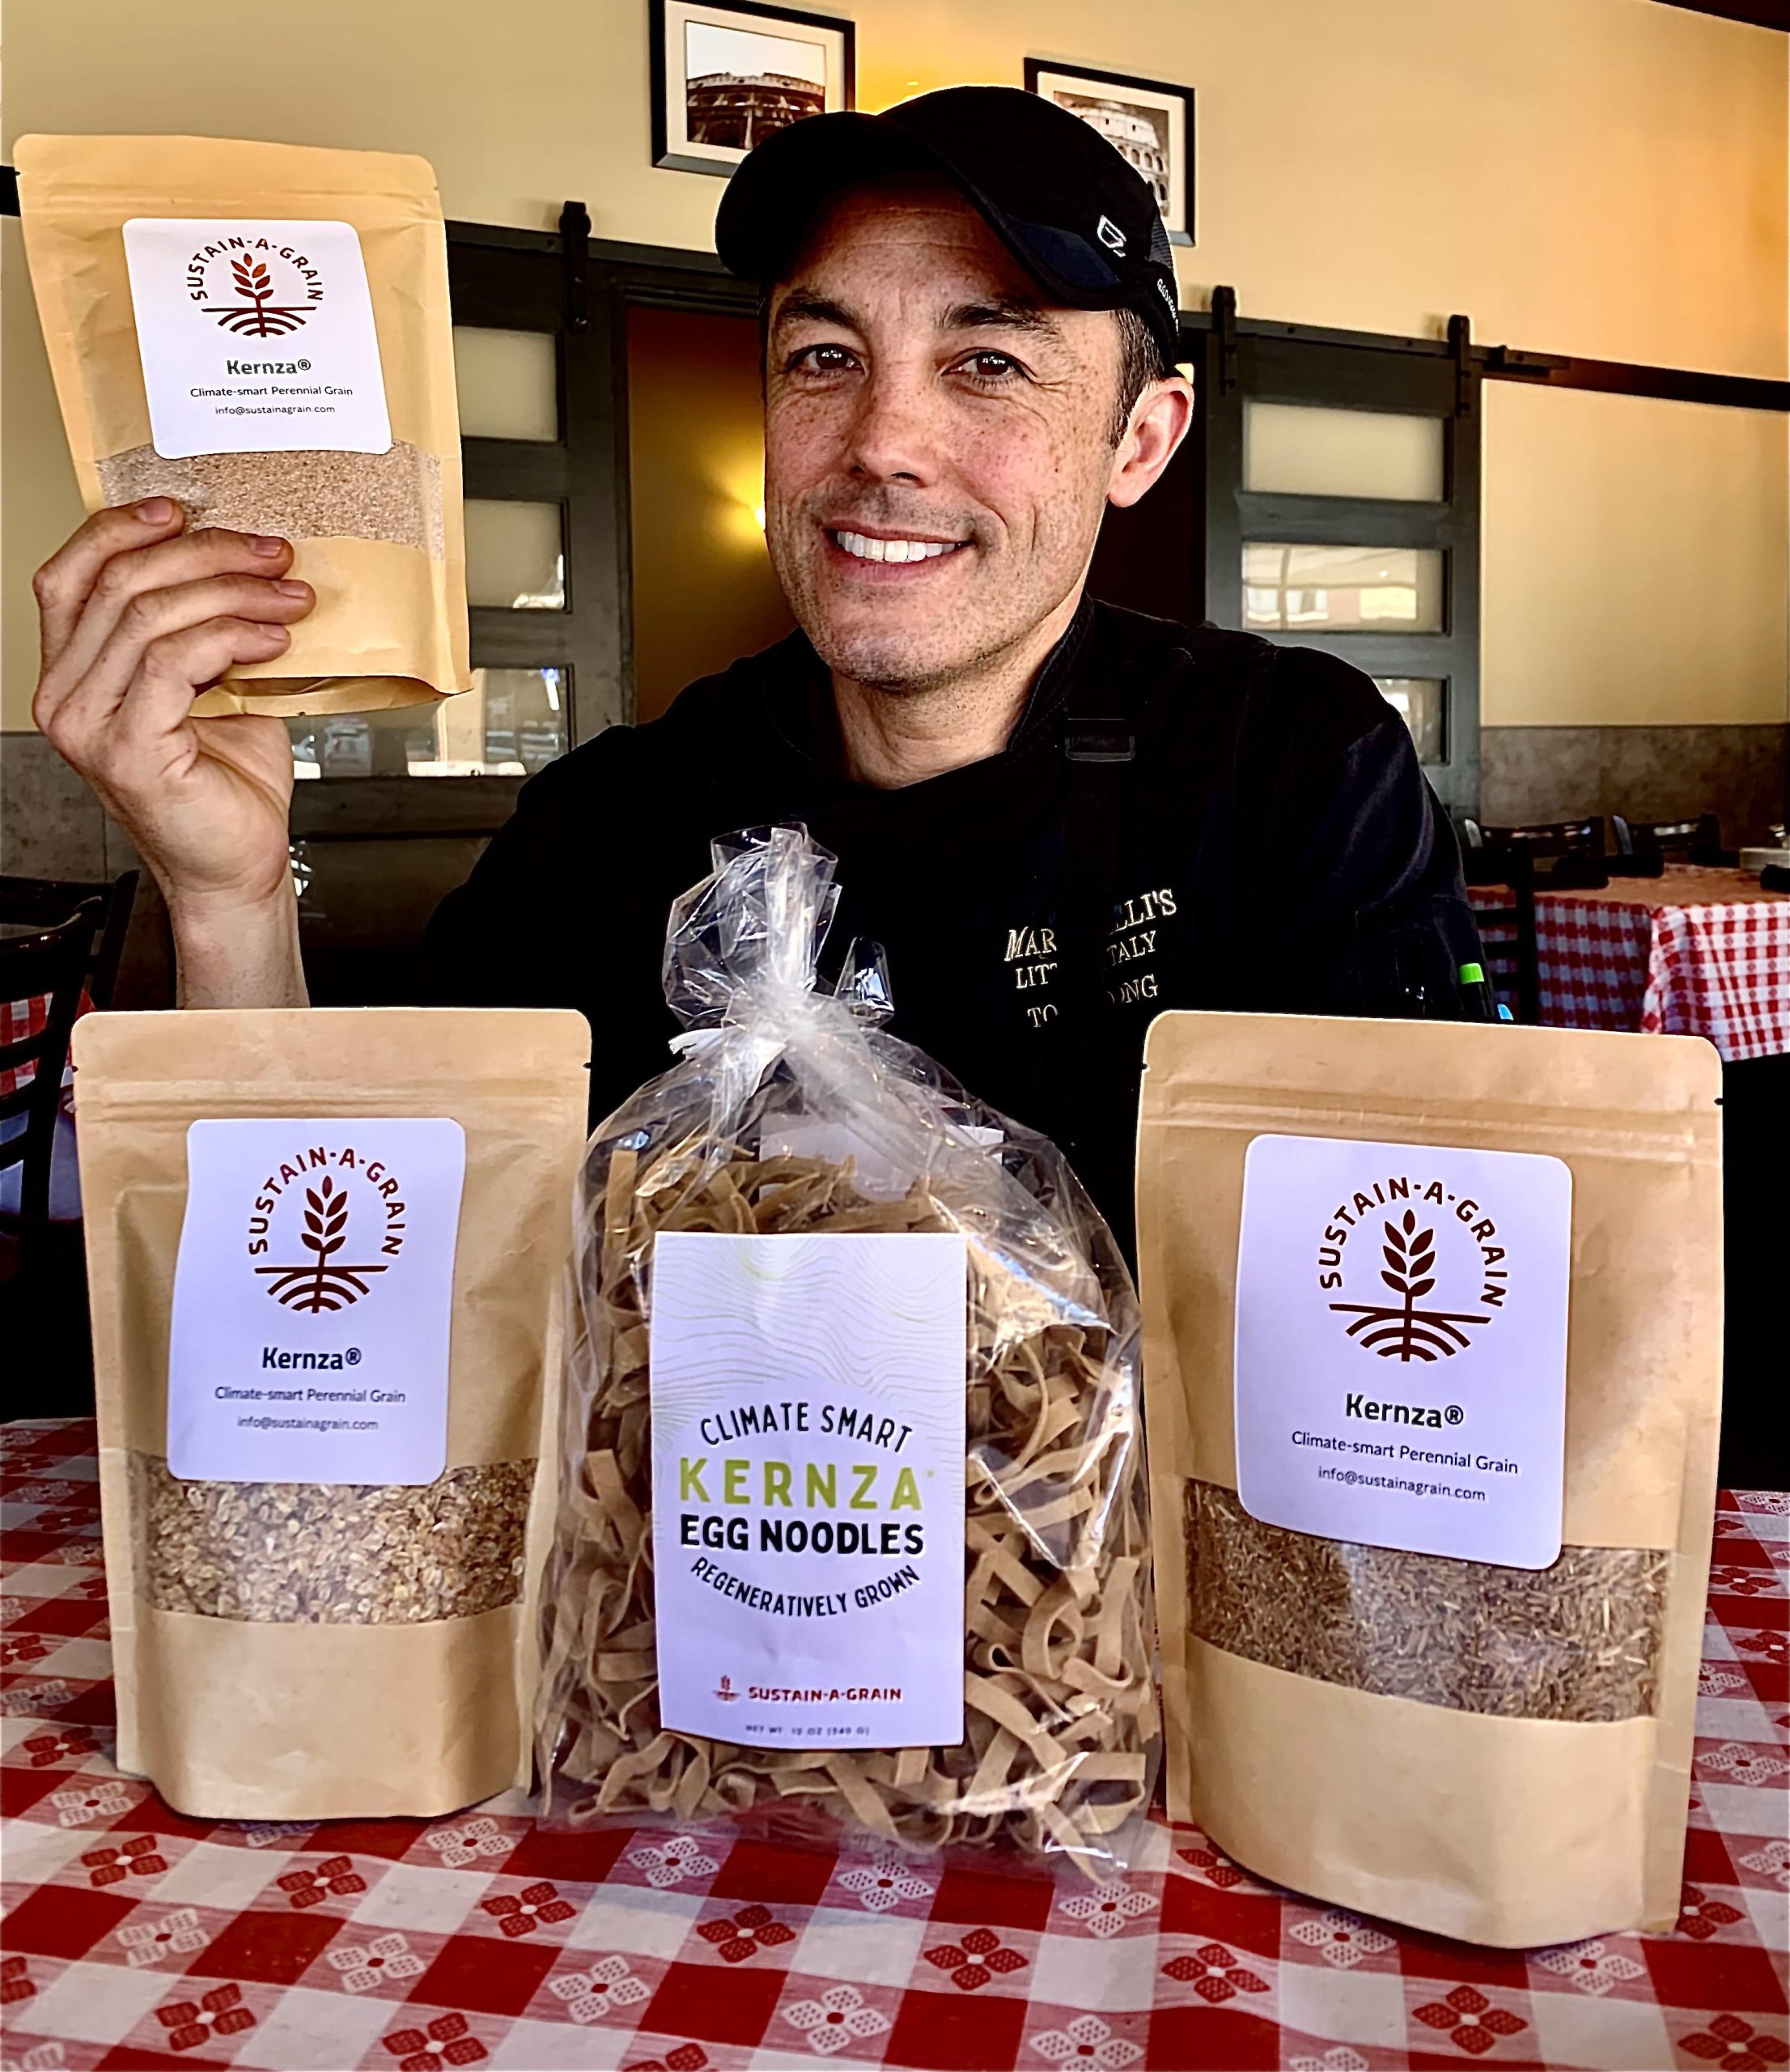 Martinelli’s Little Italy owner Tony Dong, of Salina, is stoked to put these Kernza products to work during the Kernza4Kansas event over Earth Day weekend. (Photo by Tim Unruh.)